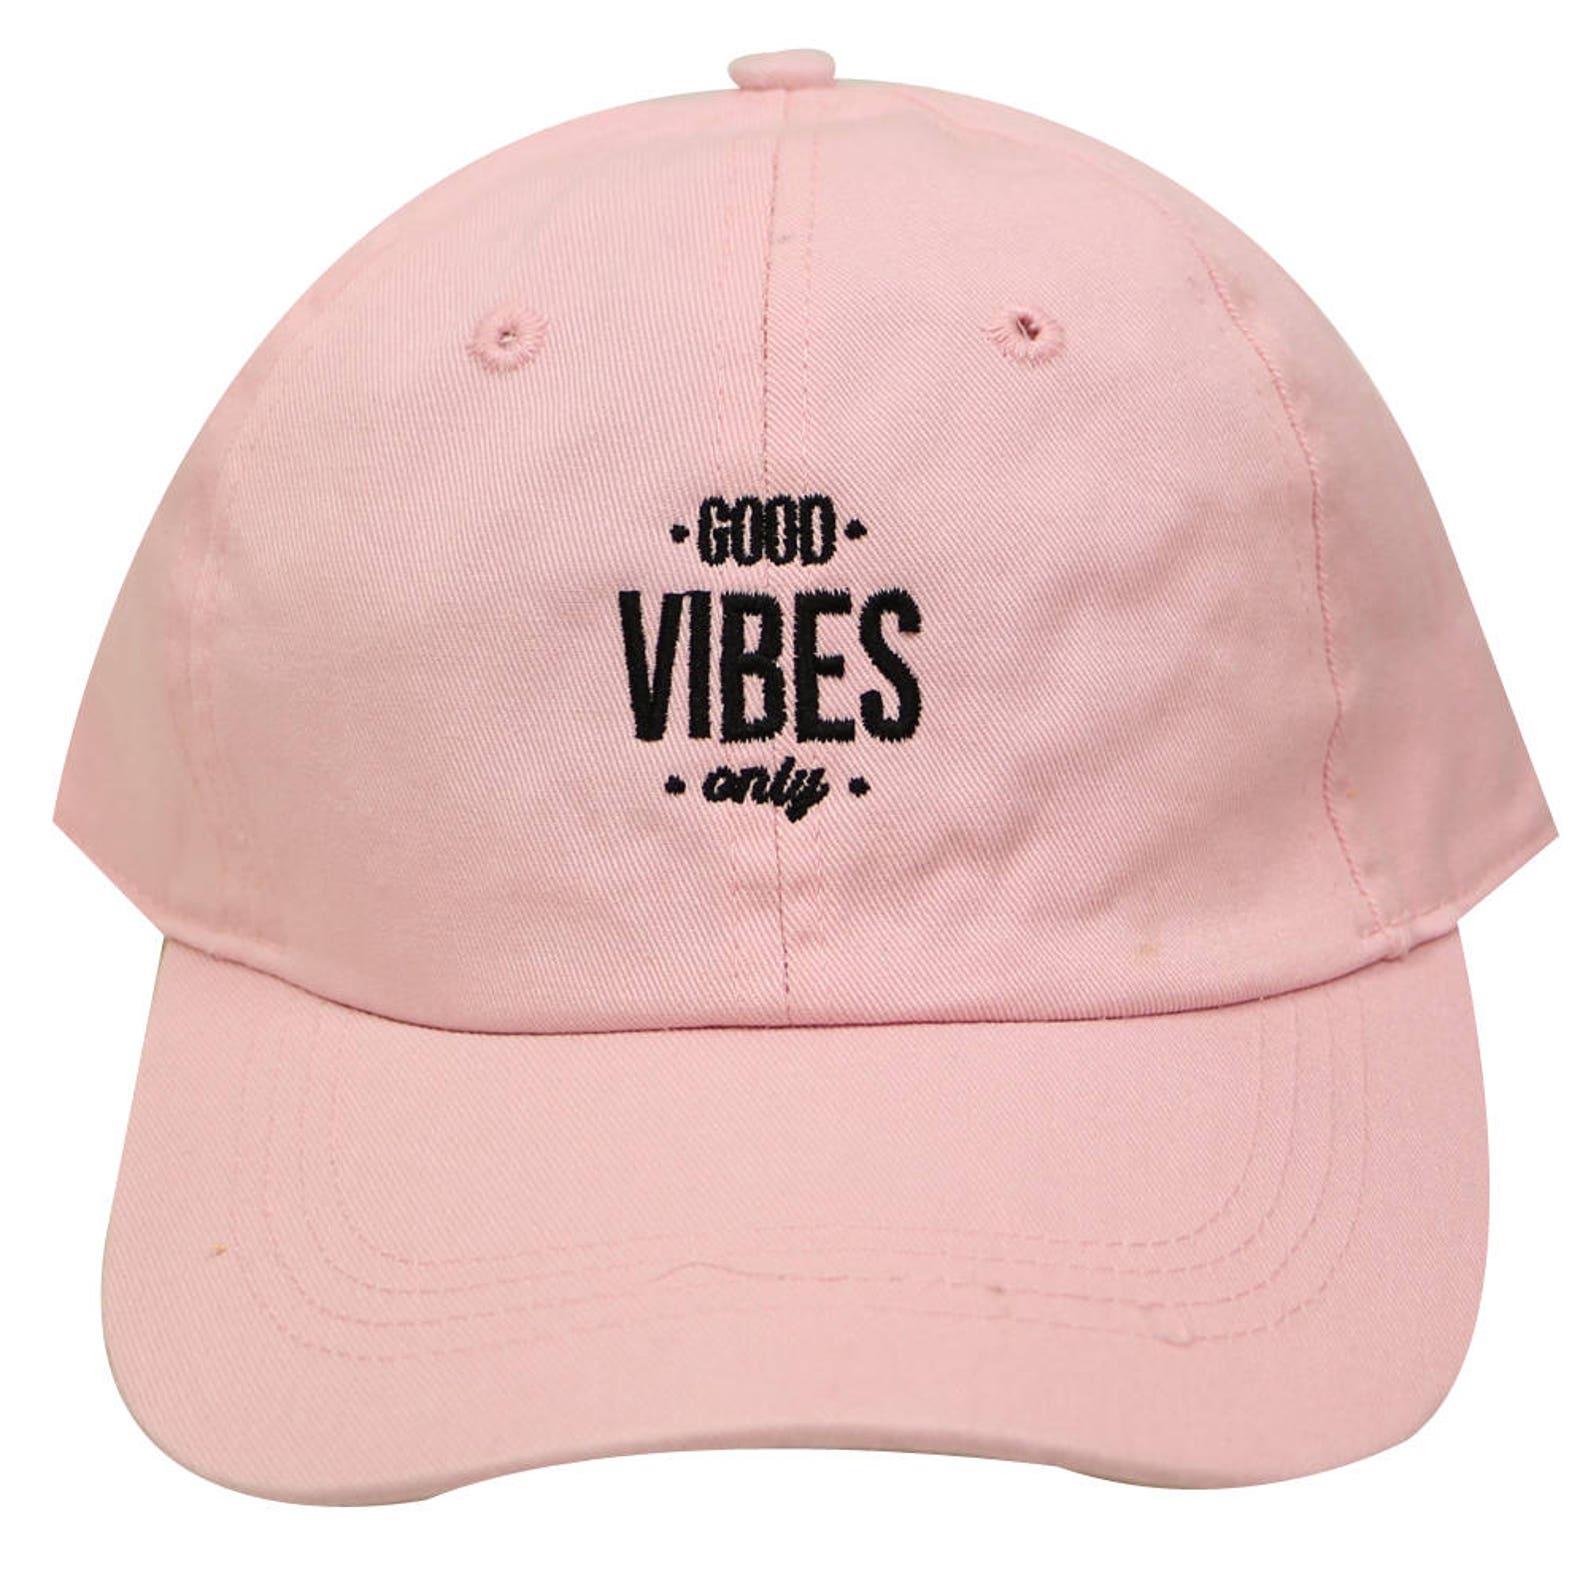 Capsule Design Good Vibes Cotton Baseball Dad Caps Pink | Etsy